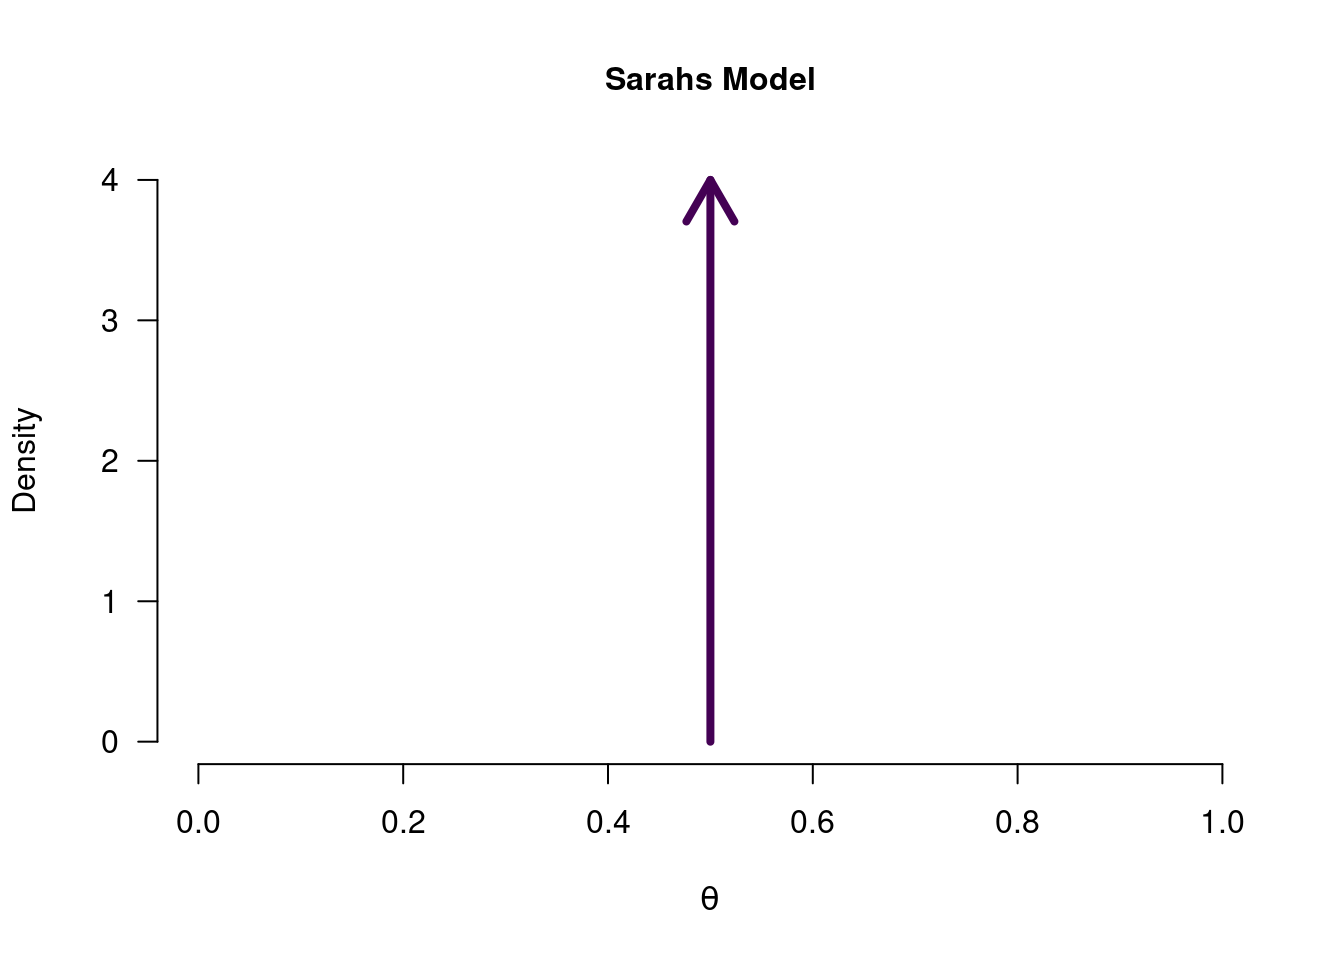 Sarah's model for a coin toss. The arrow indicates that only a single value for theta is postulated.